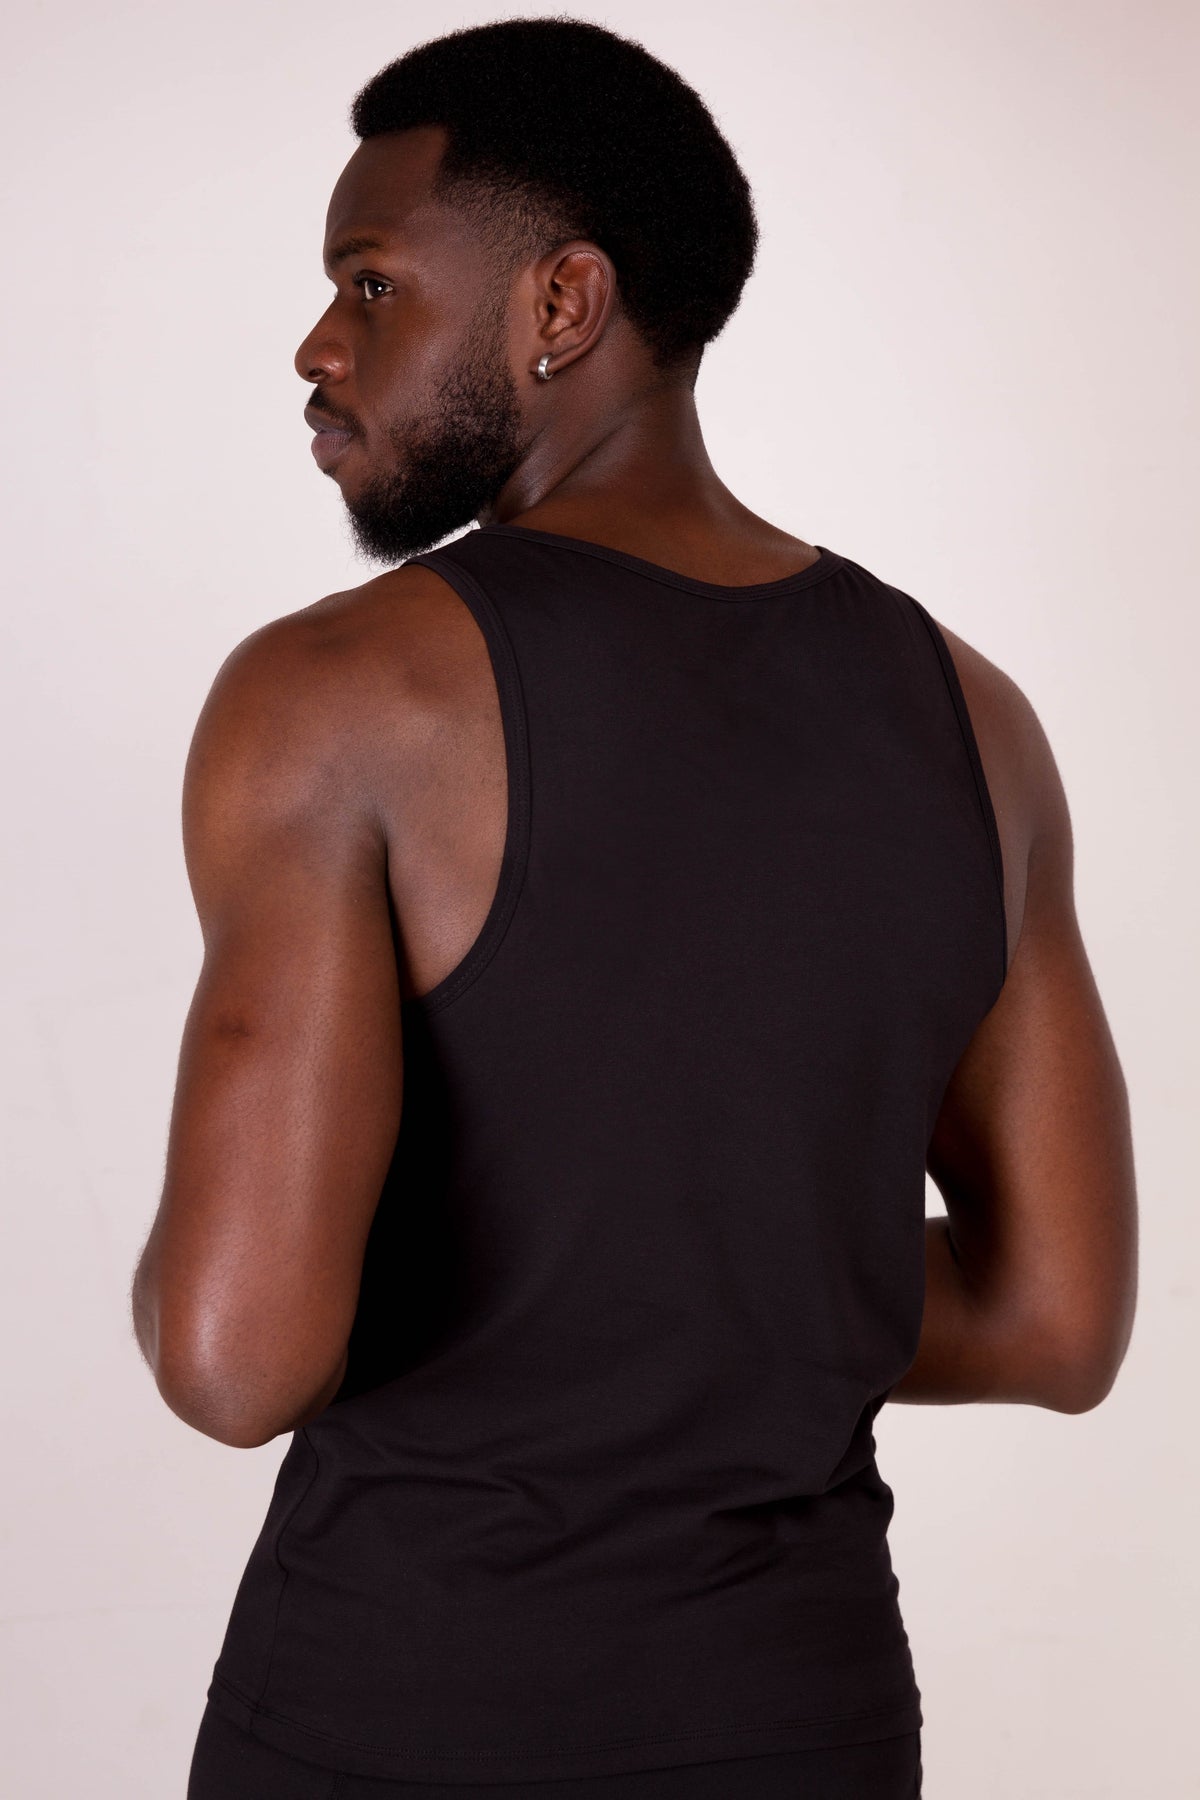 a man in a black tank top with his hands on his hips